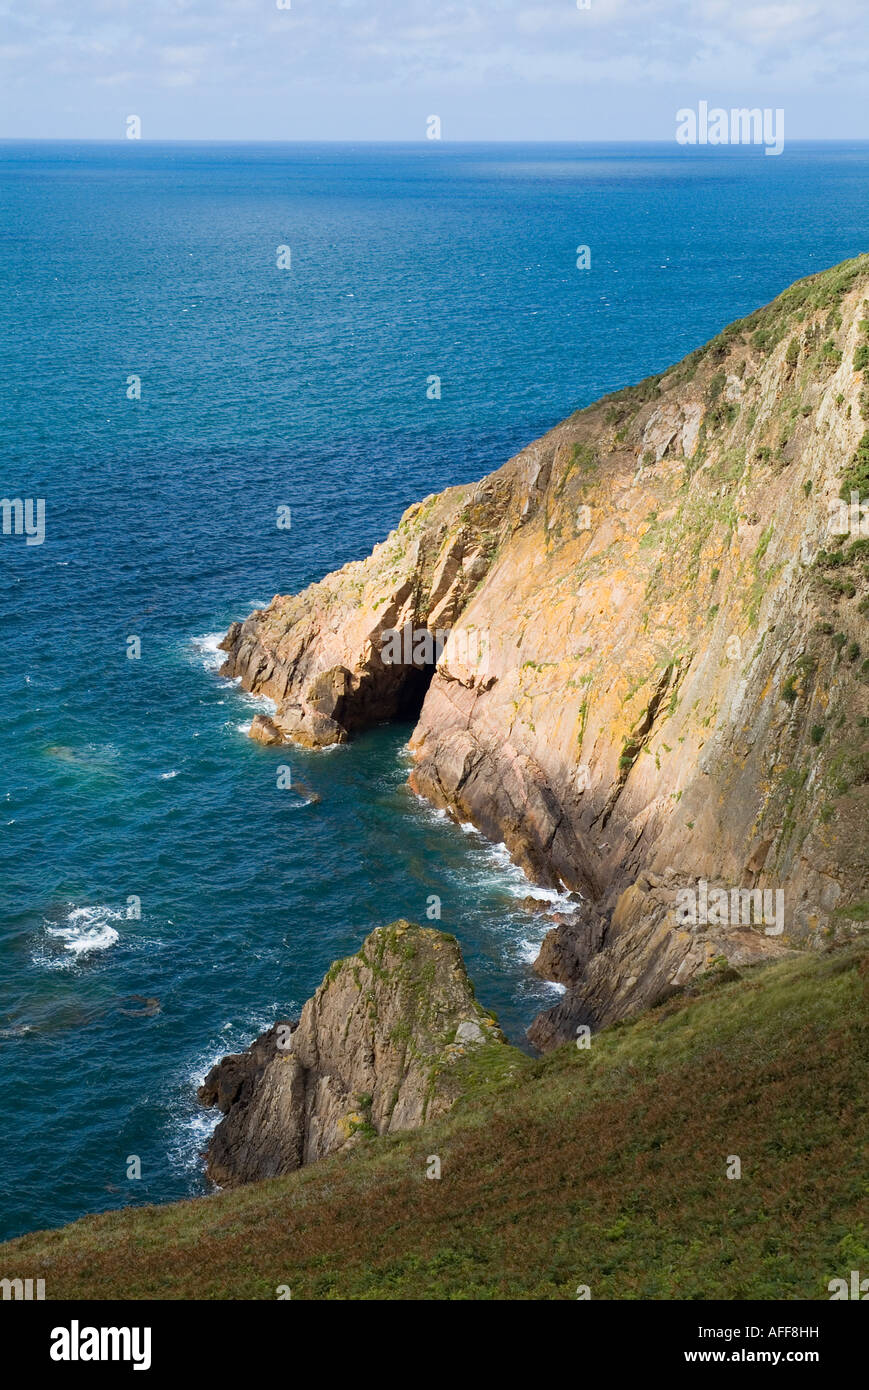 dh Les Mourier ST JOHN JERSEY North coastal footpath view of sea arch headland seacliffs island cliffs rock formation cliff Stock Photo